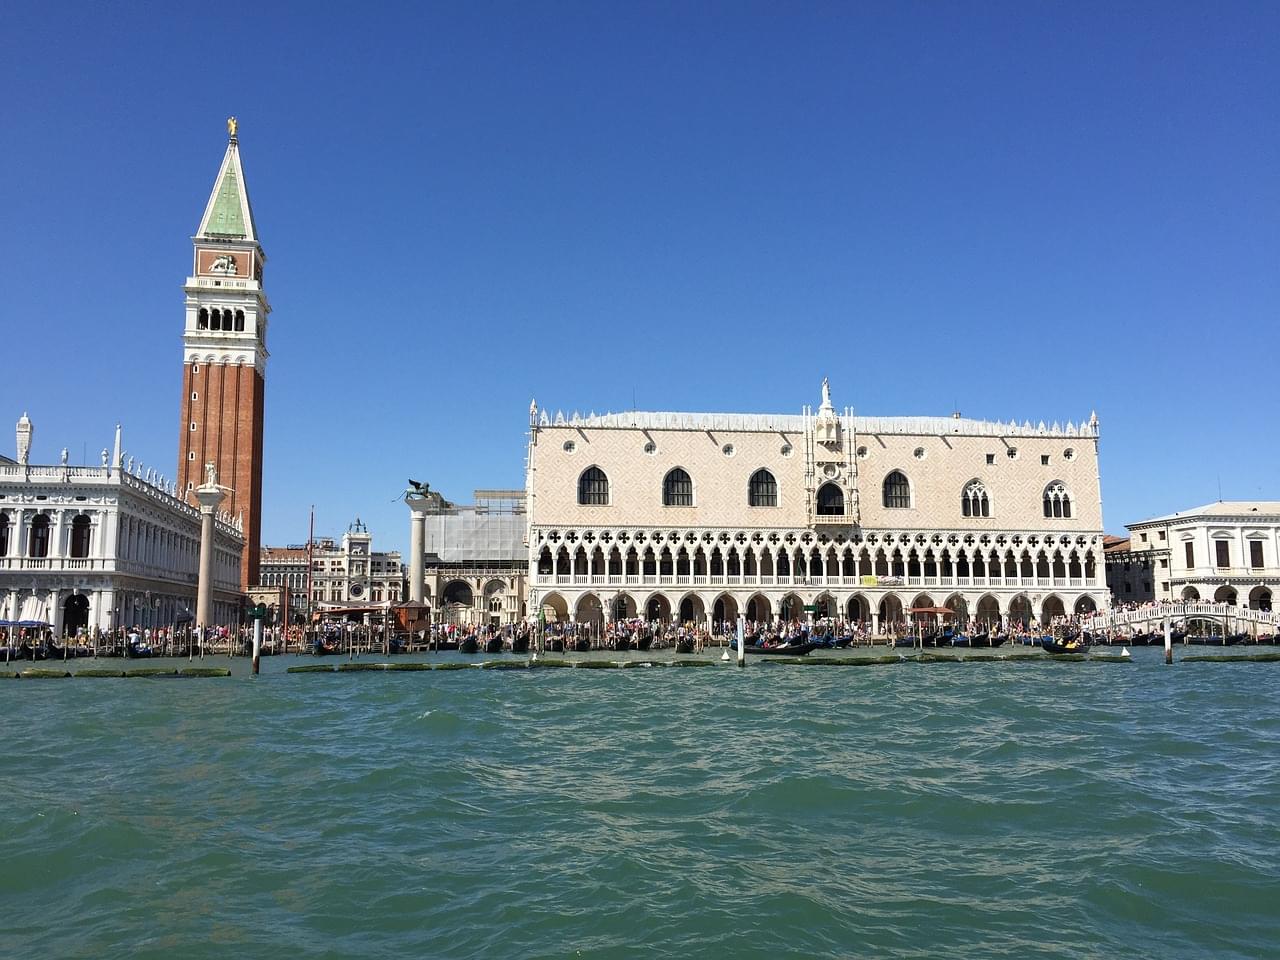 Doge’s Palace front view